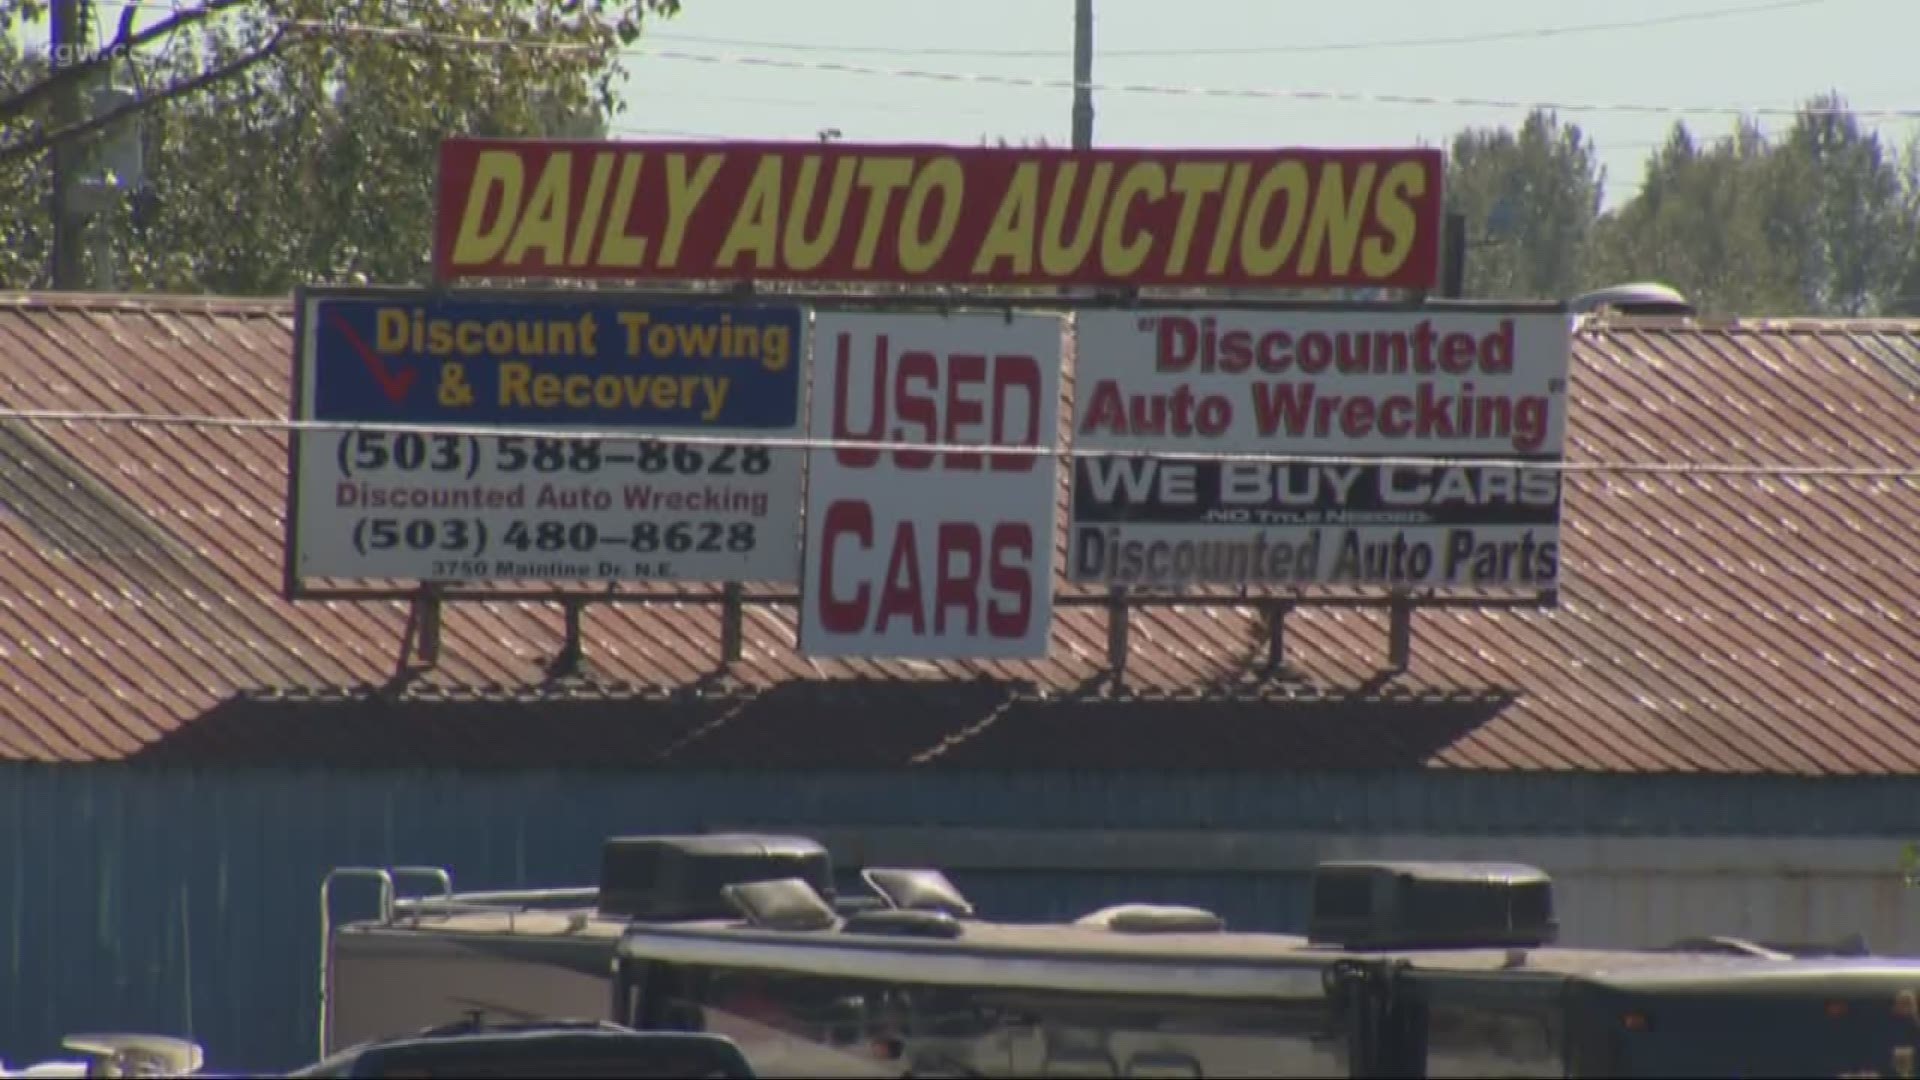 Salem towing company will have to pay up after settlement